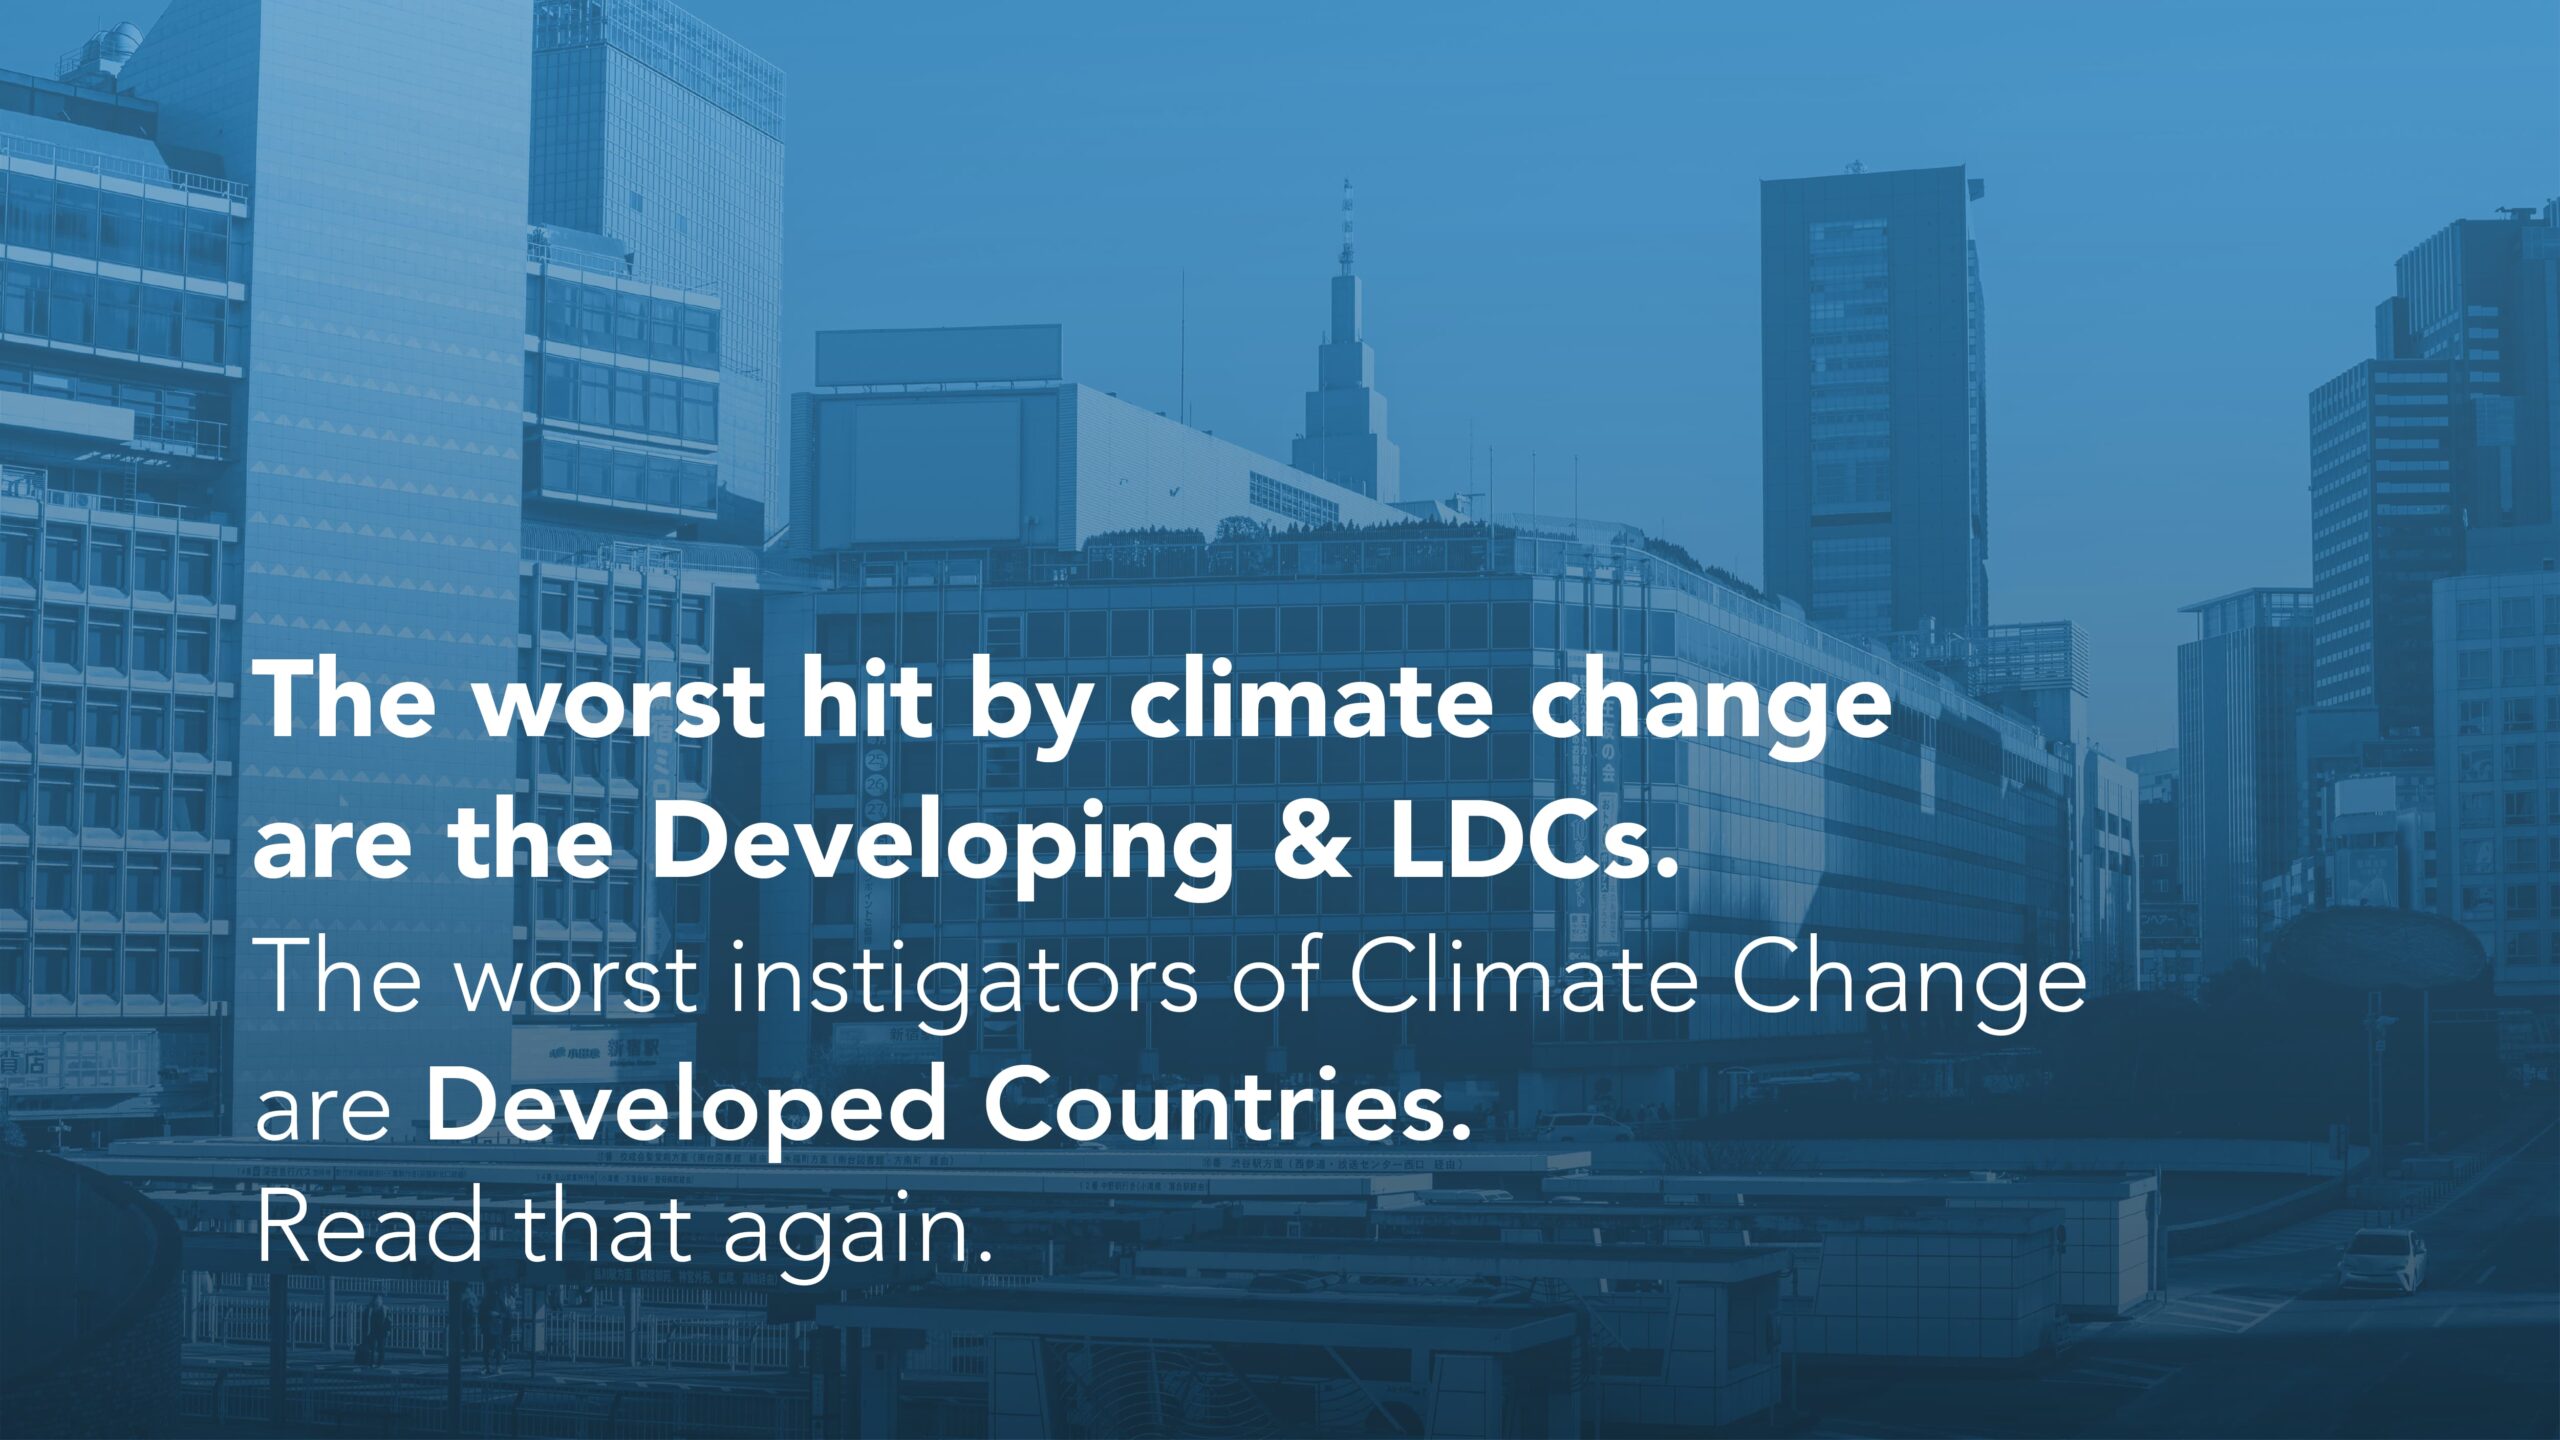 The worst hit by climate change are the developing & LDCs